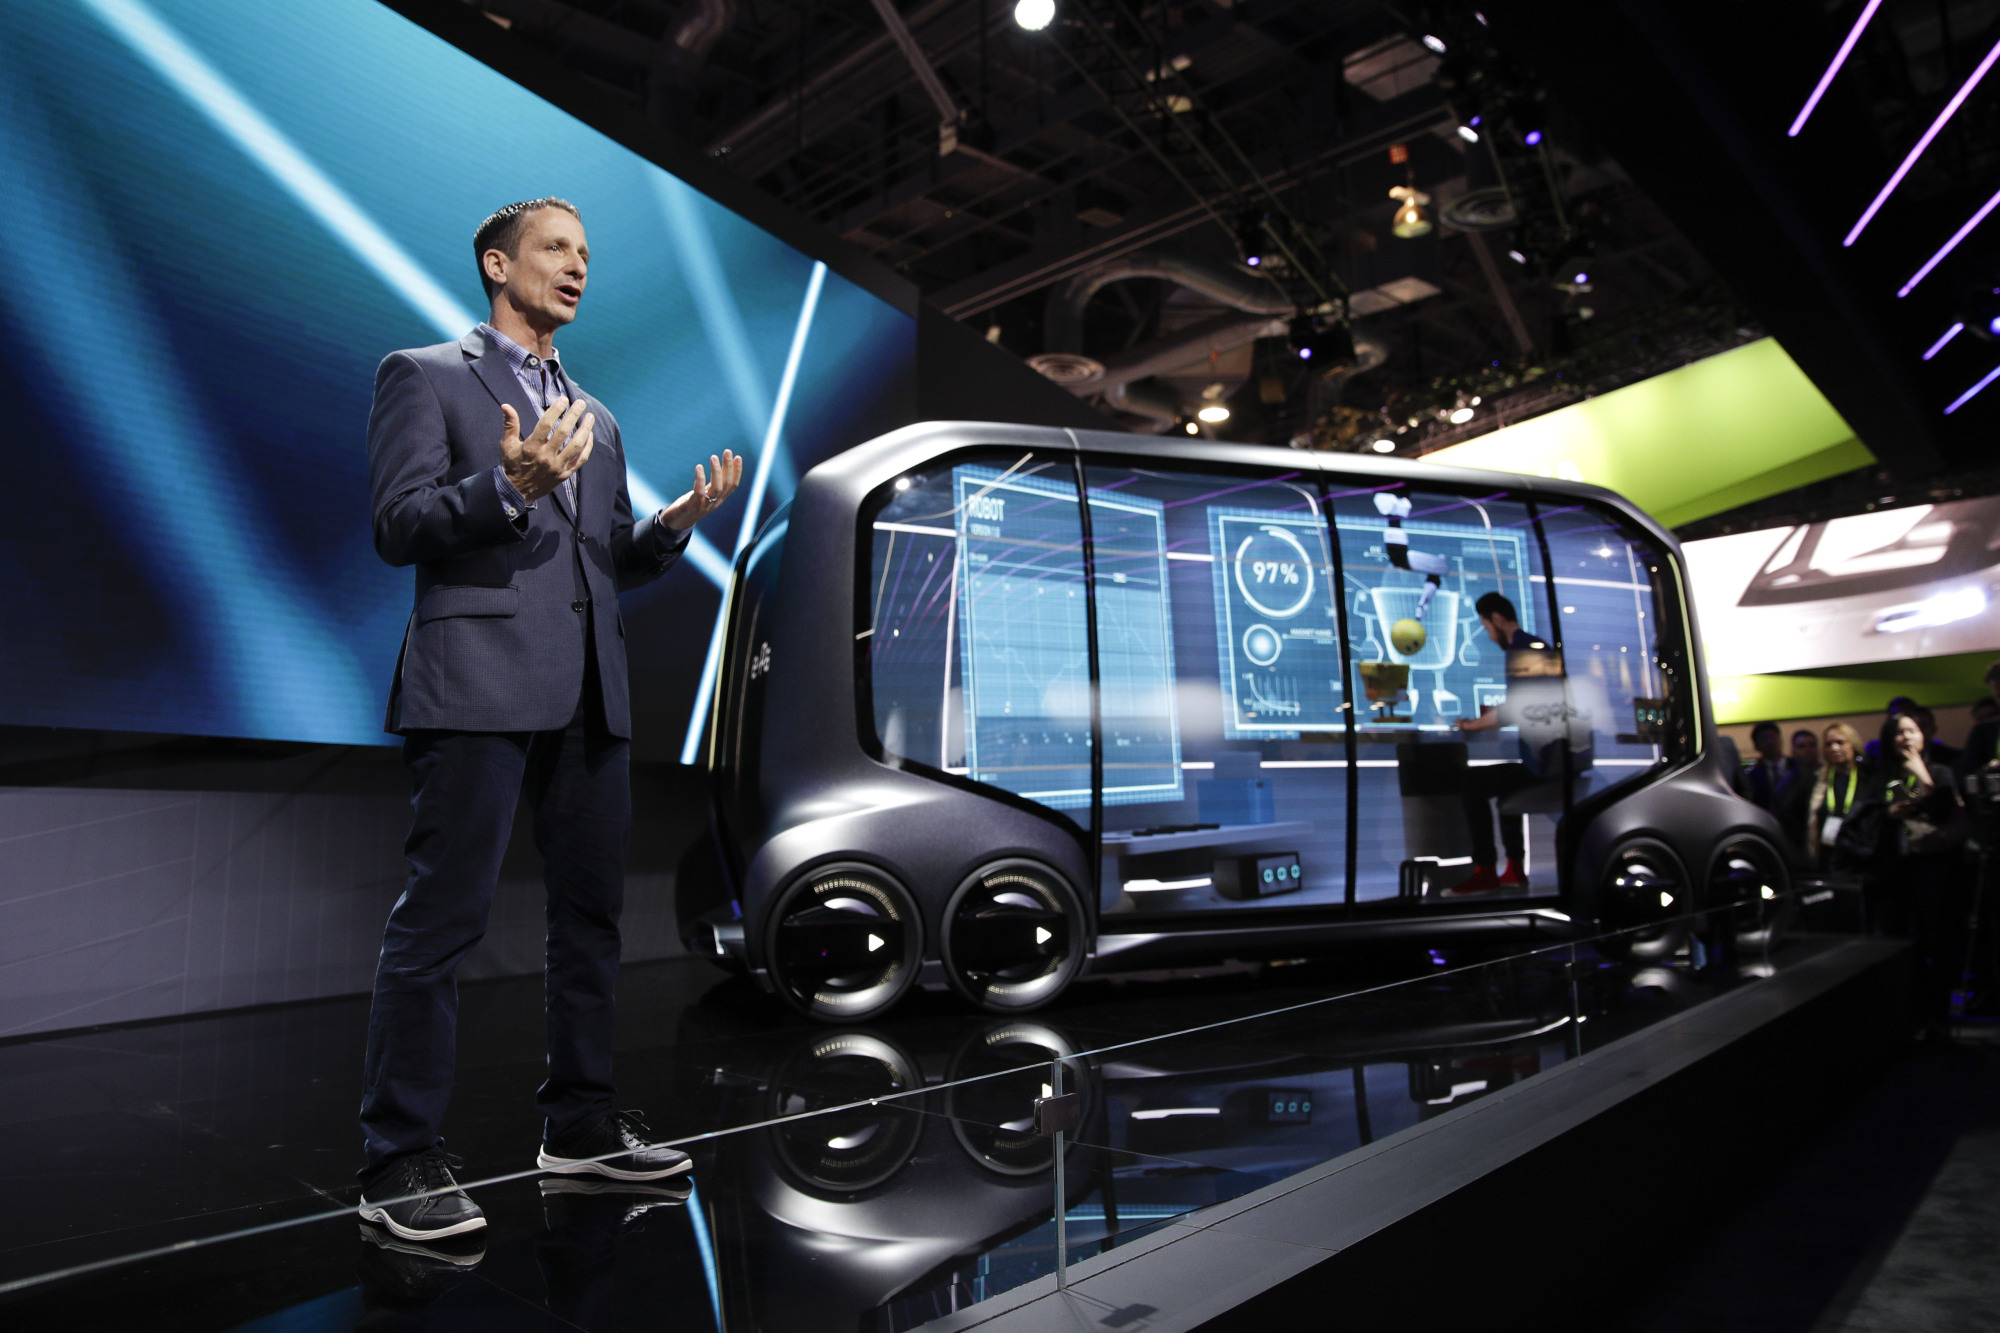 John Scumniotales, of Amazon Alexa Automotive, stands next to the Toyota e-Pallet concept vehicle at a news conference at CES International on Tuesday in Las Vegas. | AP